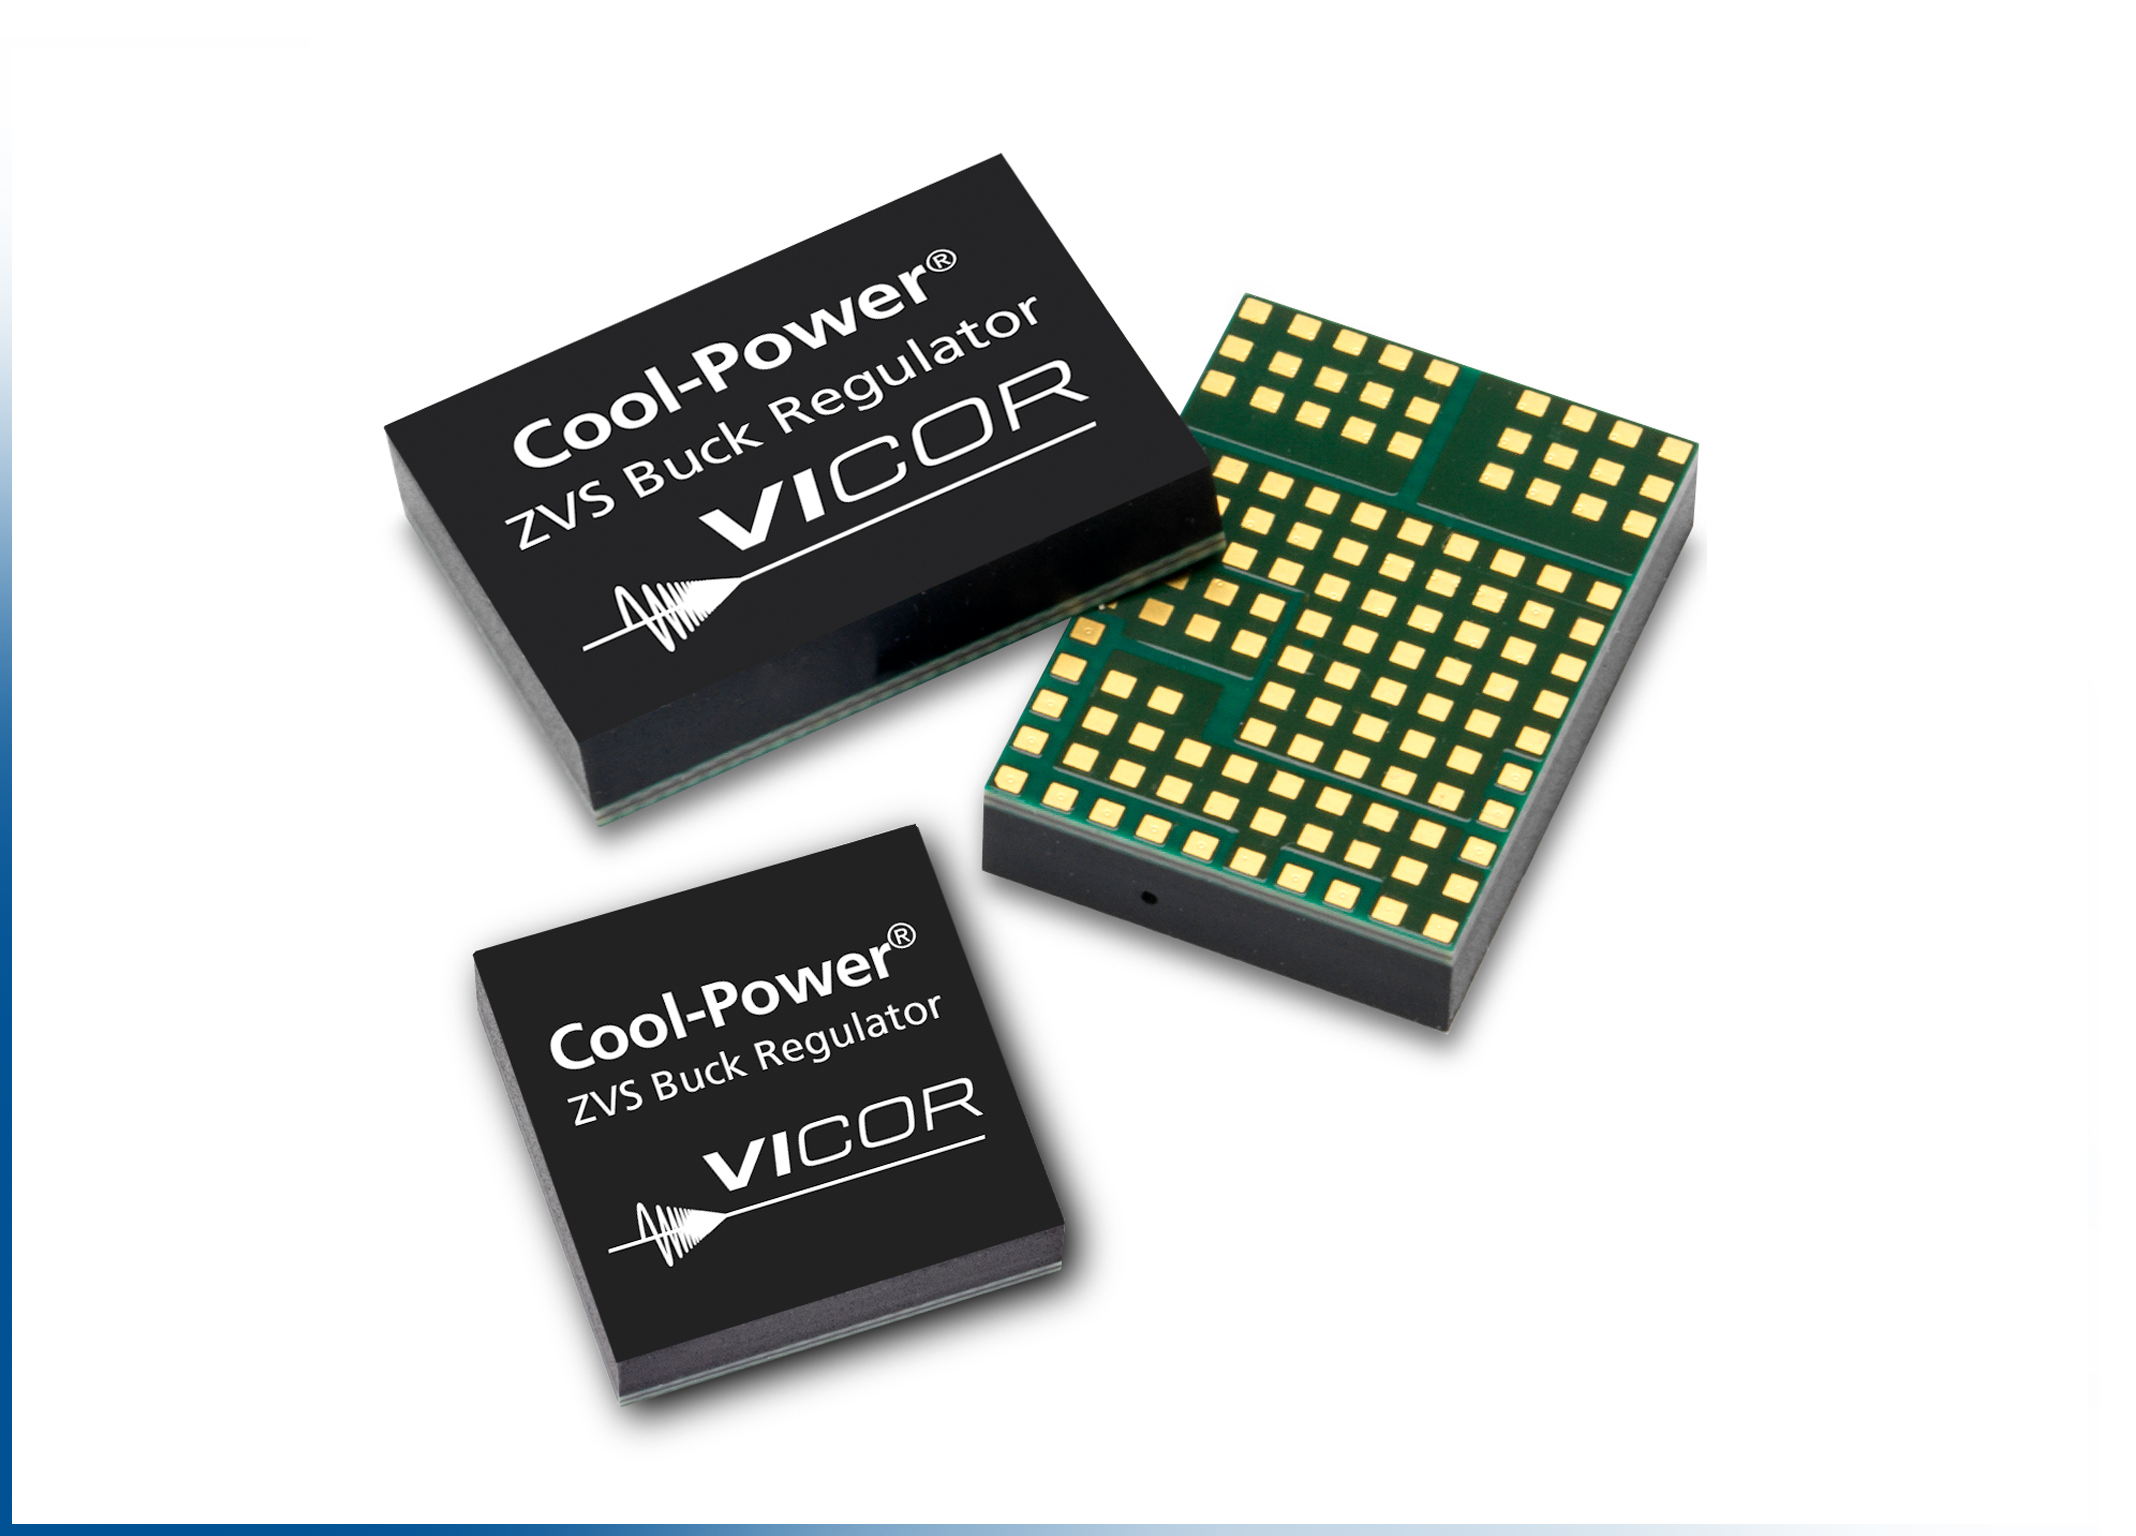 Family of Regulators Enables 48VIN to 20A Point-of-Load Voltages Spanning 2.2VOUT – 14VOUT